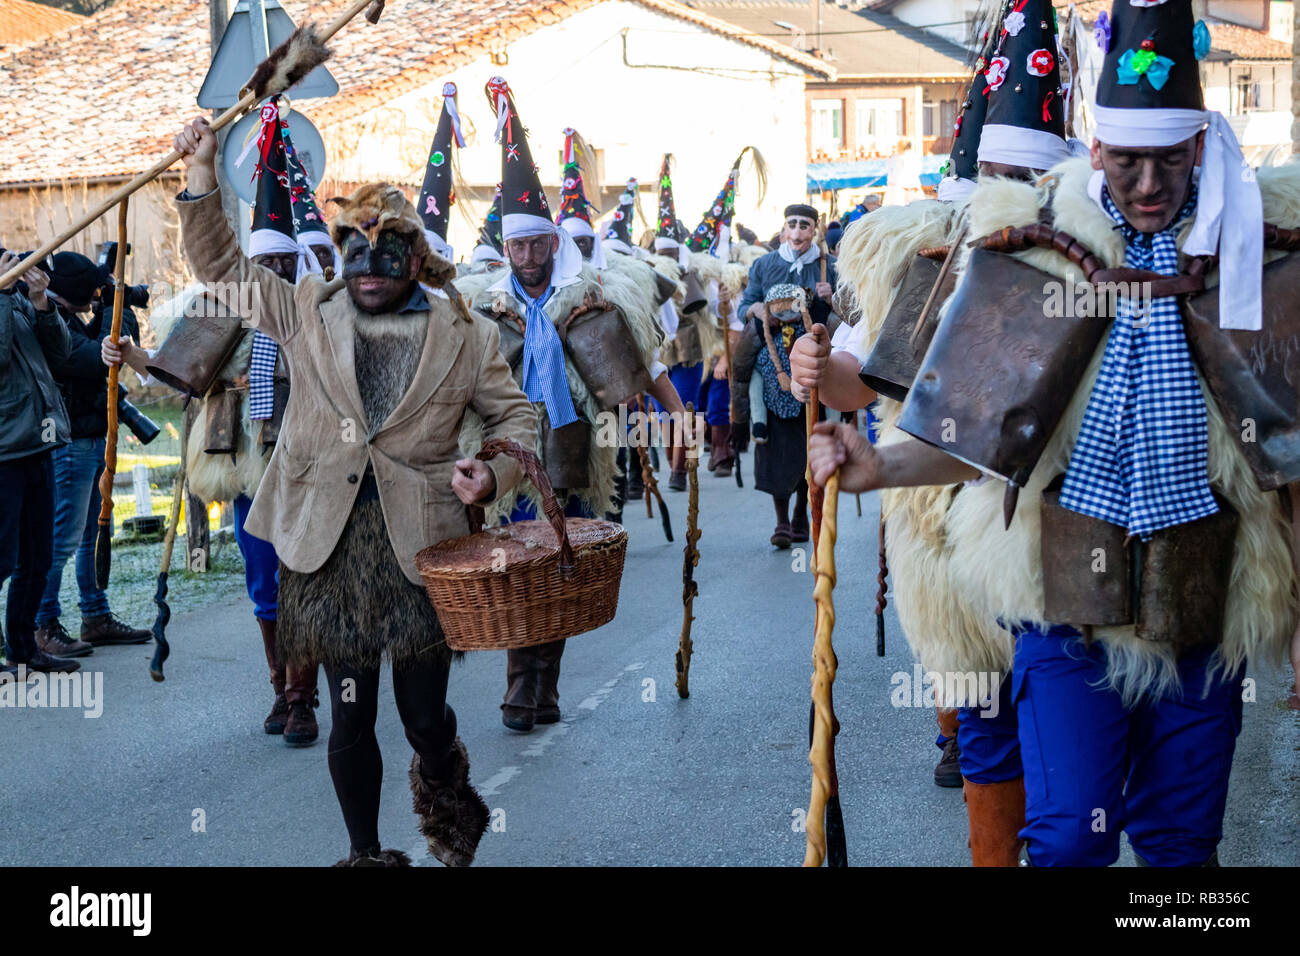 Cantabria, Spain. 06th Jan, 2019.  Zarramaco dancers seen during the celebration.La Vijanera is a fiesta of festive nature that takes place in the town of SiliÃ³ (Molledo), Cantabria (Spain) on the first Sunday of each year. Due to its popularity and tradition, it has been declared a Fiesta of National Tourist Interest. Credit: ZUMA Press, Inc./Alamy Live News Stock Photo